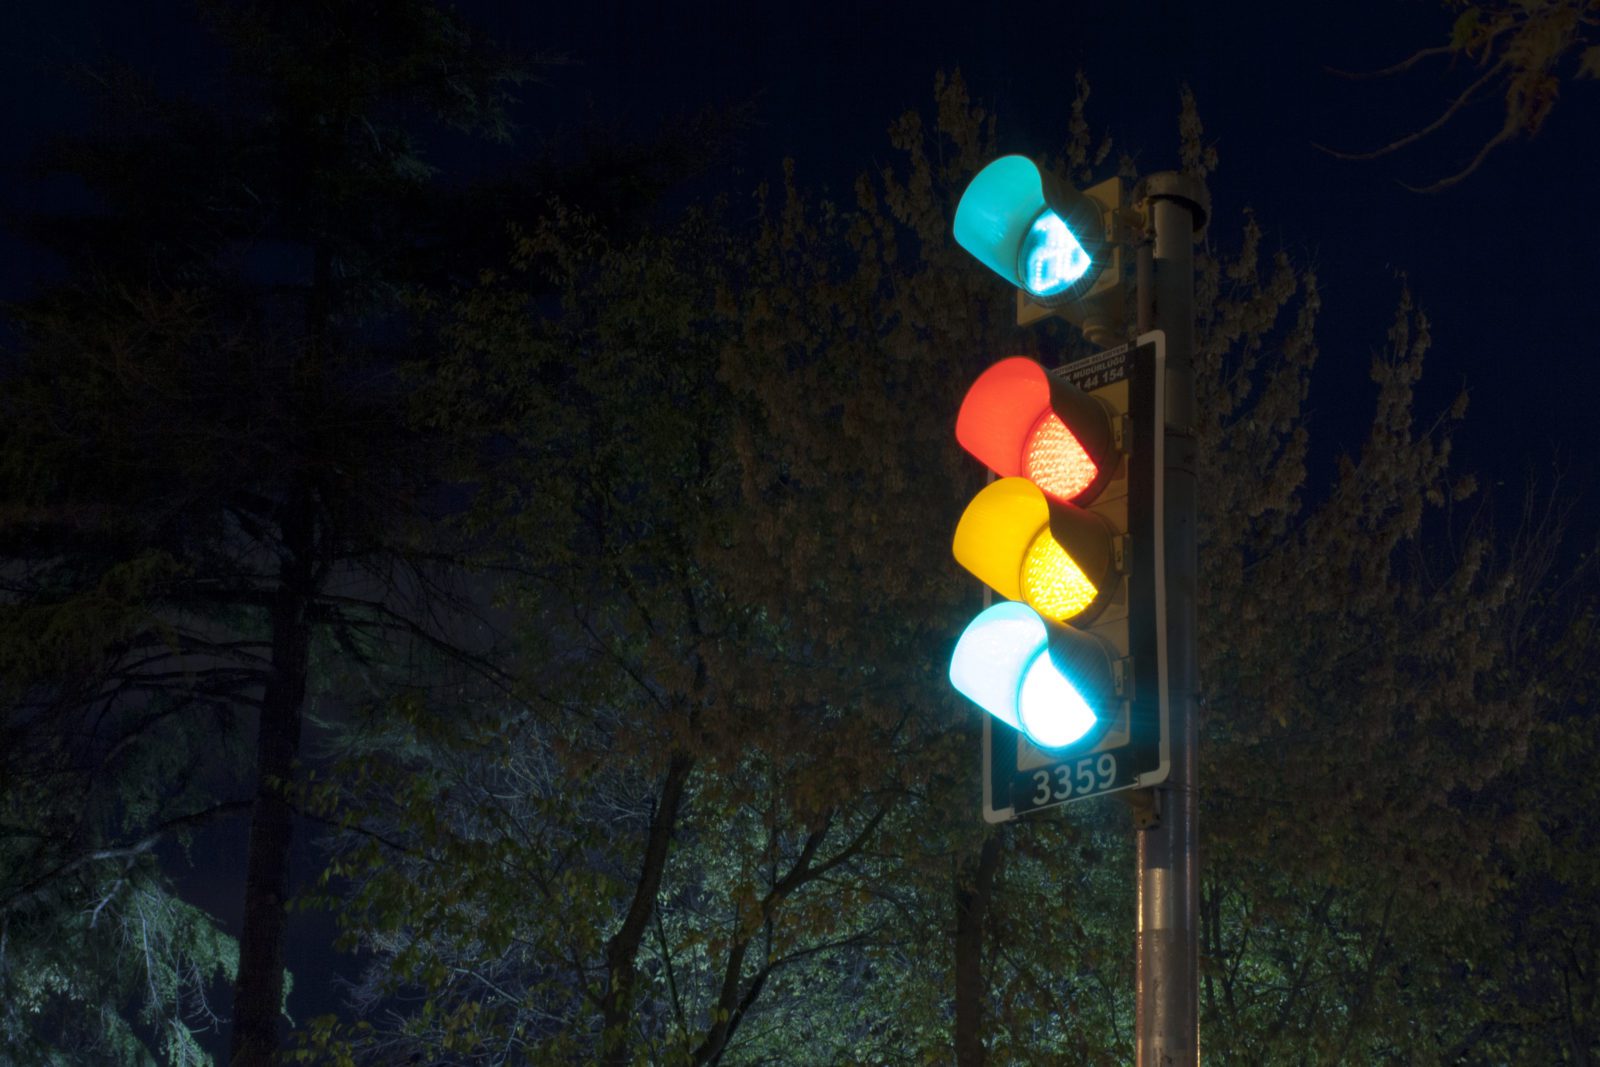 RED LIGHT, GREEN LIGHT: FINDING THE RHYTHM OF EFFECTIVE MINISTRY